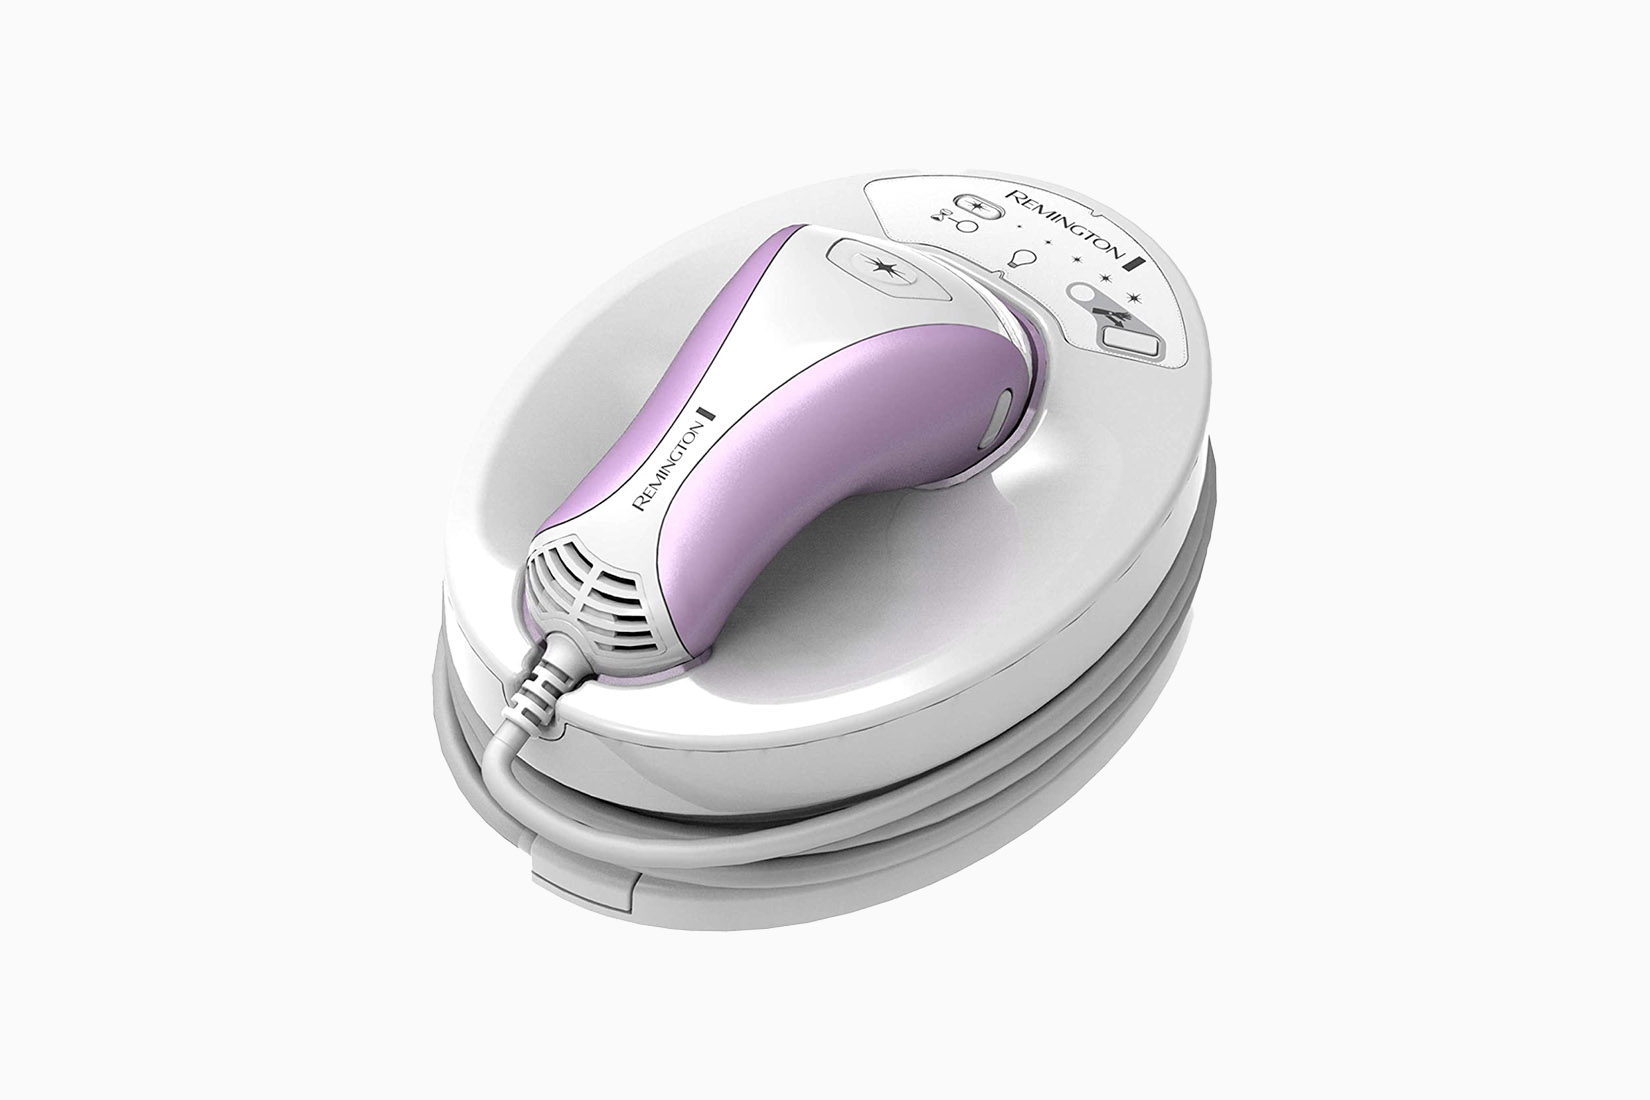 10 Best At-Home IPL Hair Removal Devices: Safe & Effective (2021)